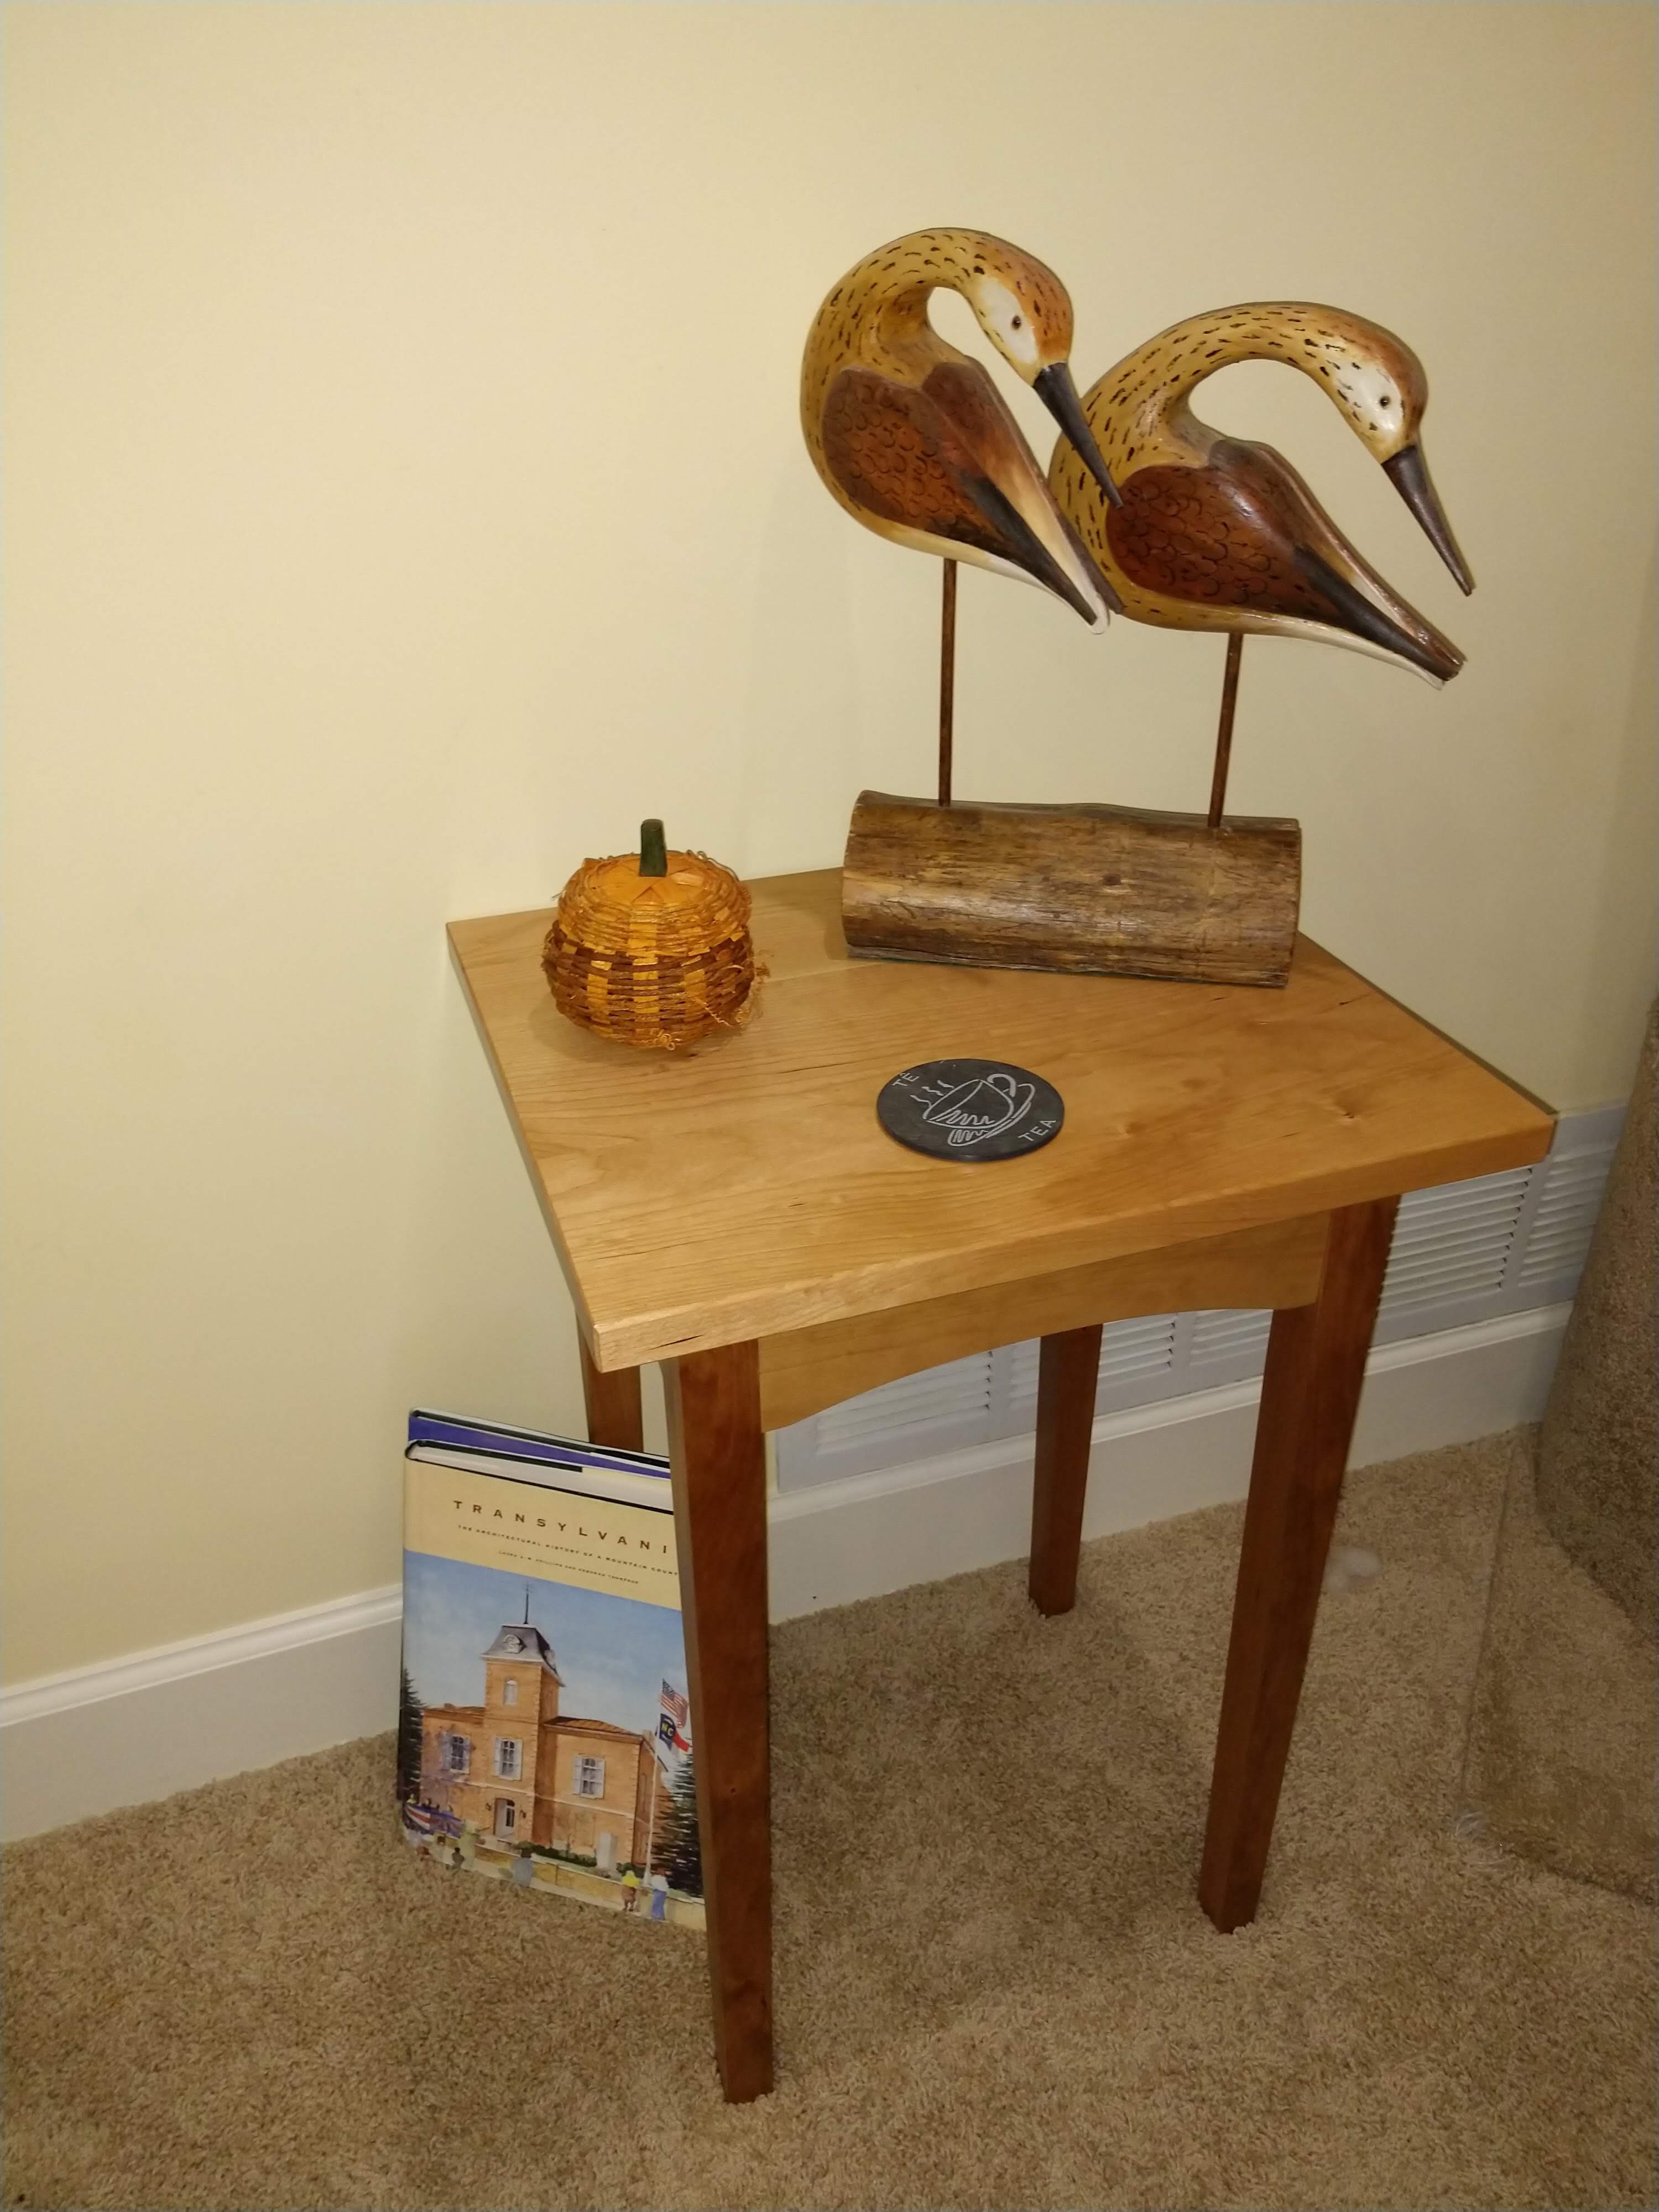 How to Make a Table by Bob Mullins